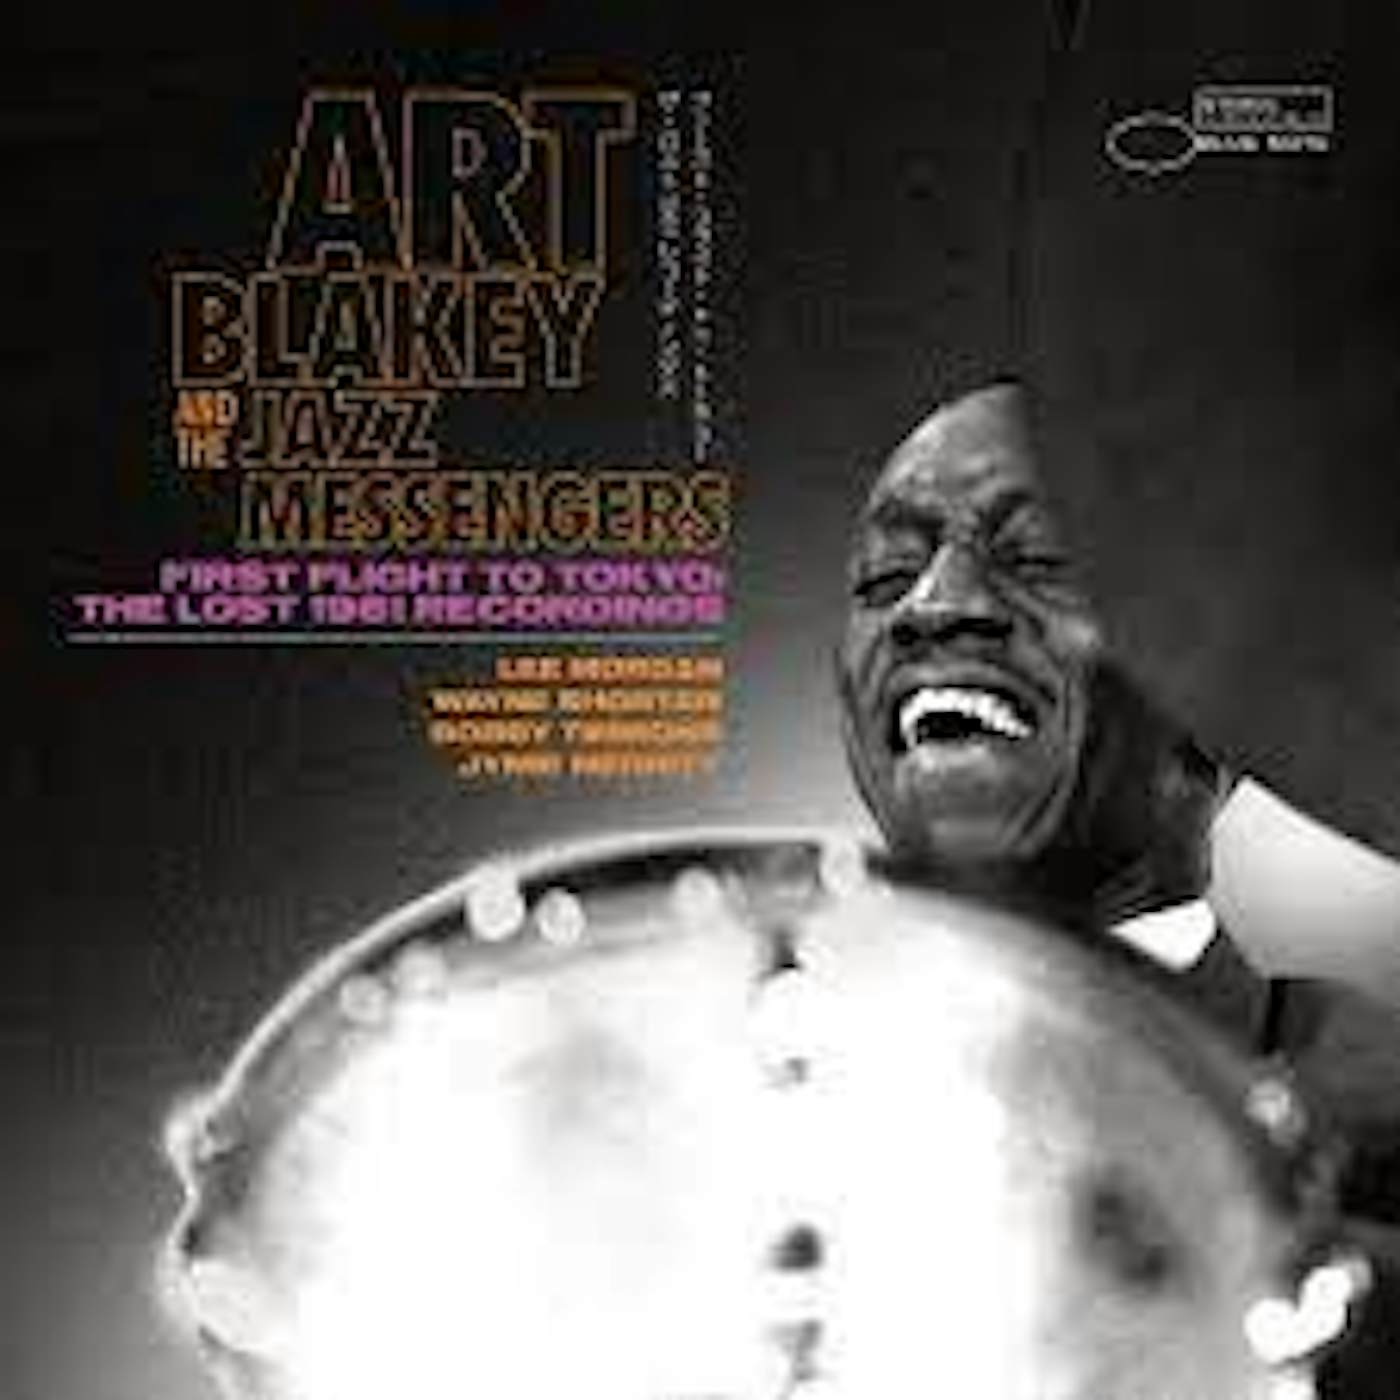 Art Blakey First Flight to Tokyo: The Lost 1961 Recordings